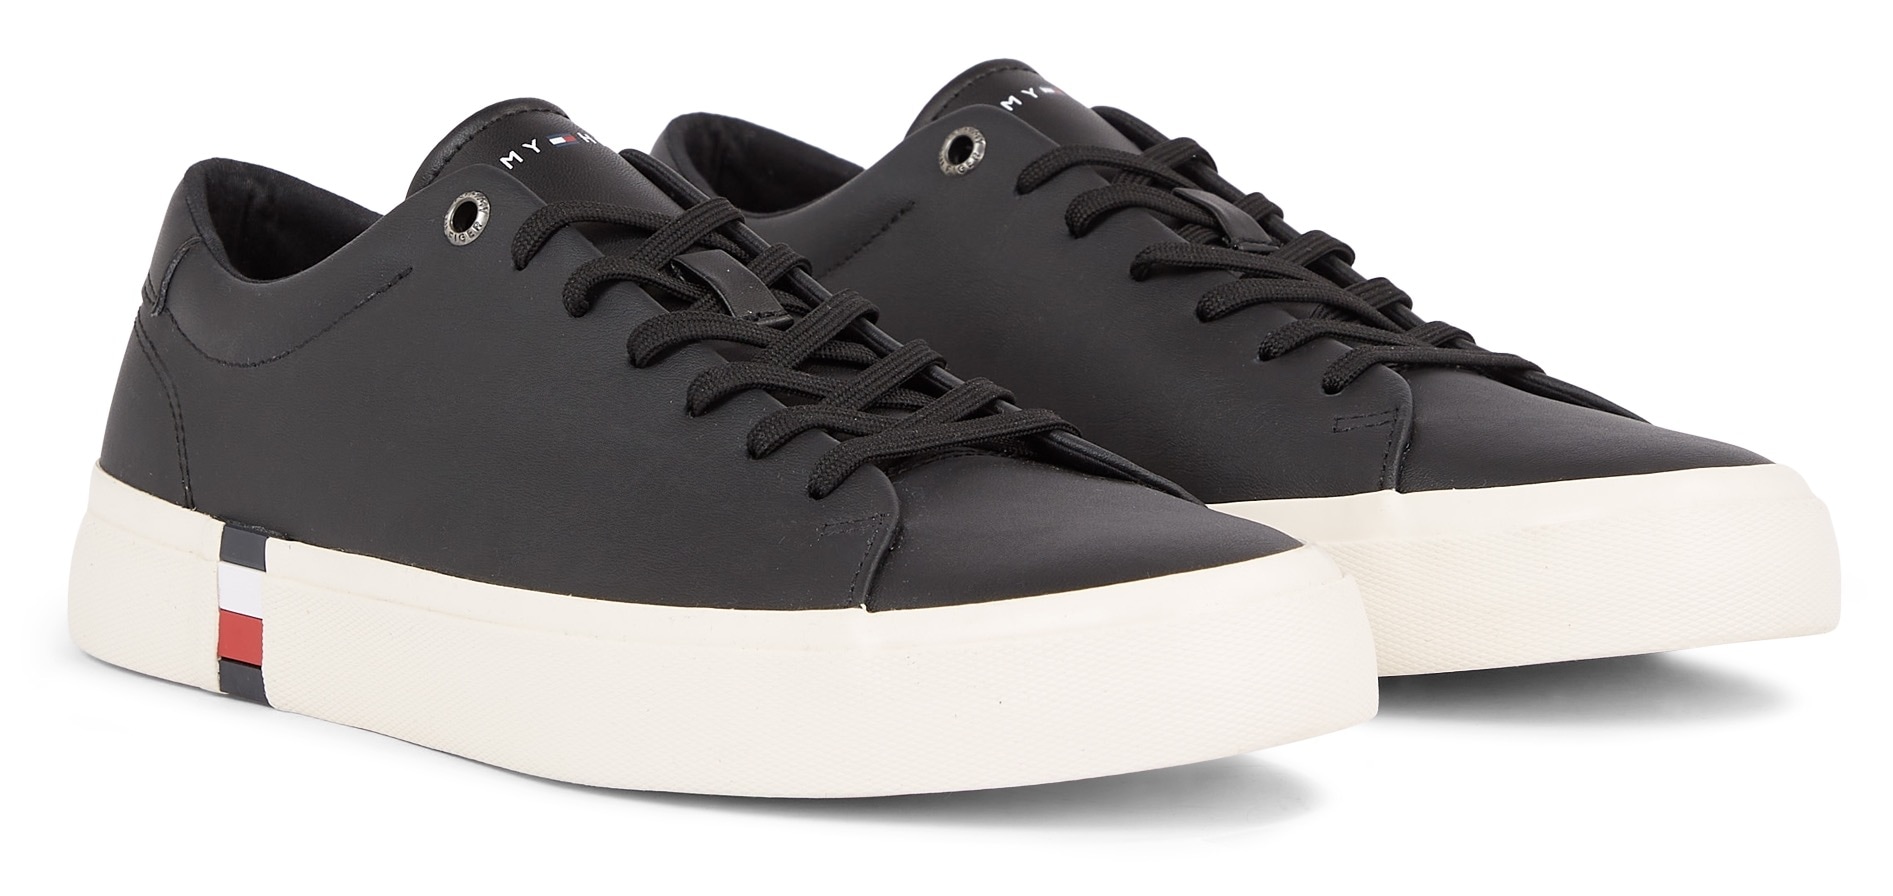 TOMMY HILFIGER Sneaker »CORPORATE LEATHER DETAIL VULC...